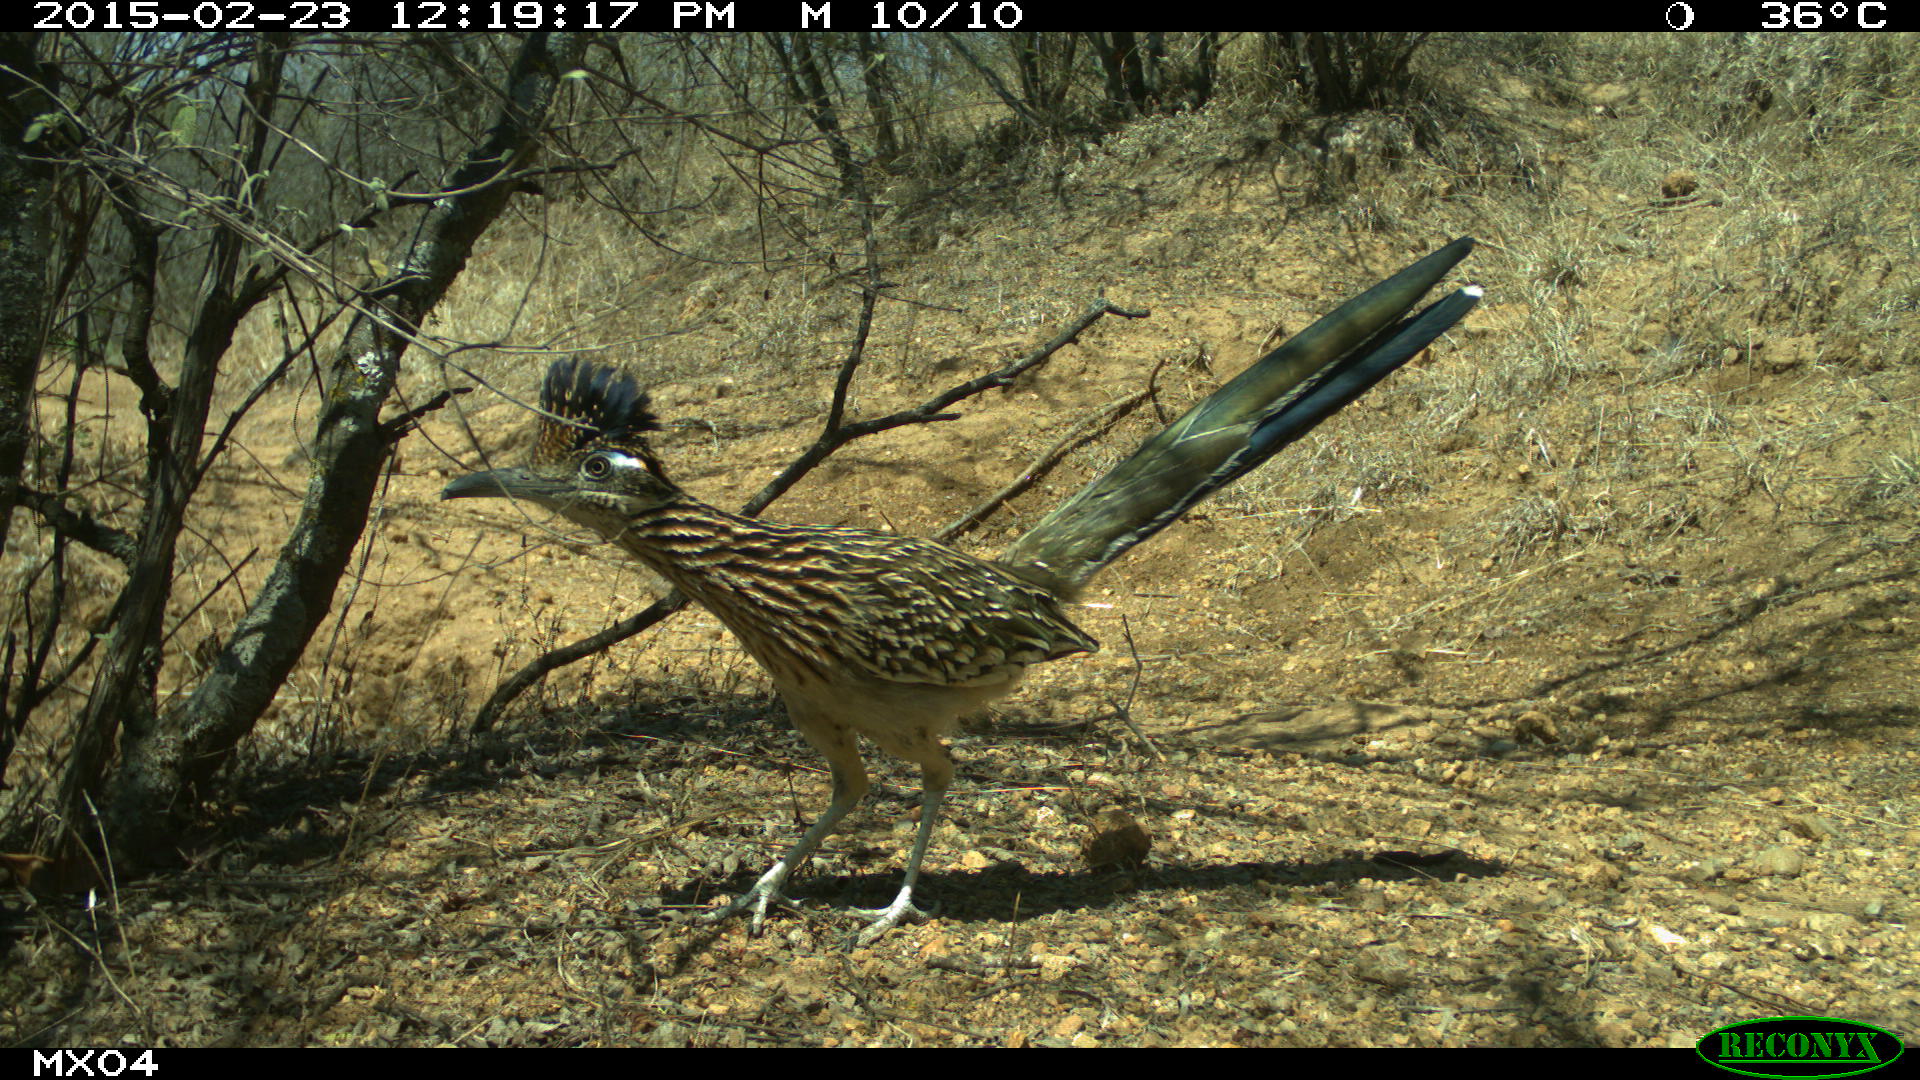 roadrunner Camera Trap Photos from Mexico